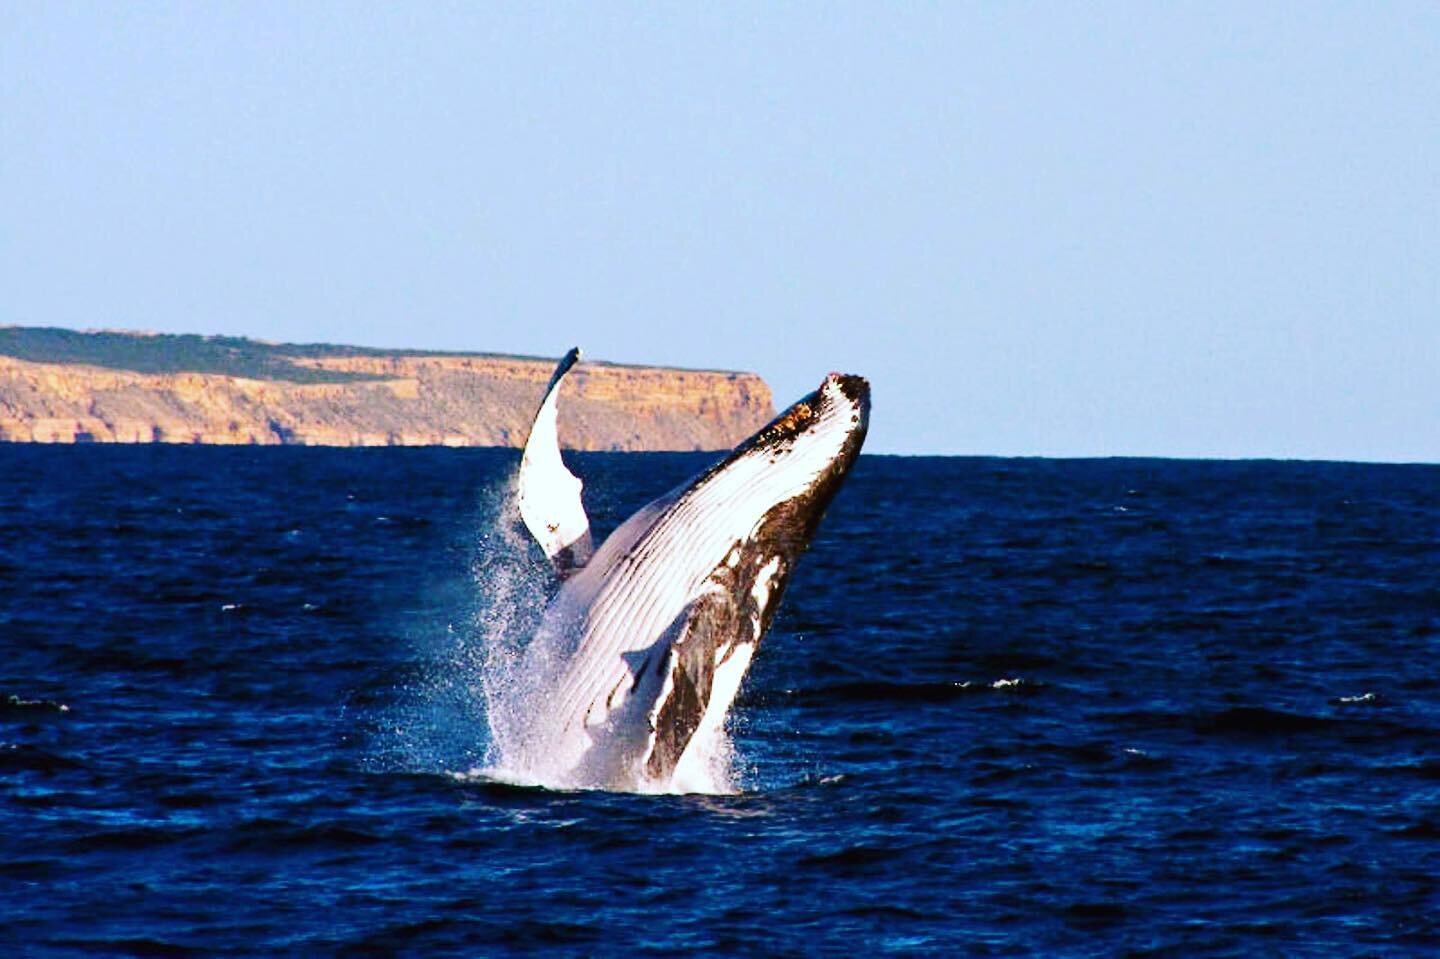 A typical day in Gantheaume Bay!🐋
Join us on one of our Whale Discovery tours ~ watch the Humpback&rsquo;s as they frolic &amp; play &amp; slowly make their migratory journey back south ✨
.
www.reefwalker.com.au
.
#reefwalkerkalbarri #reefwalkerocea